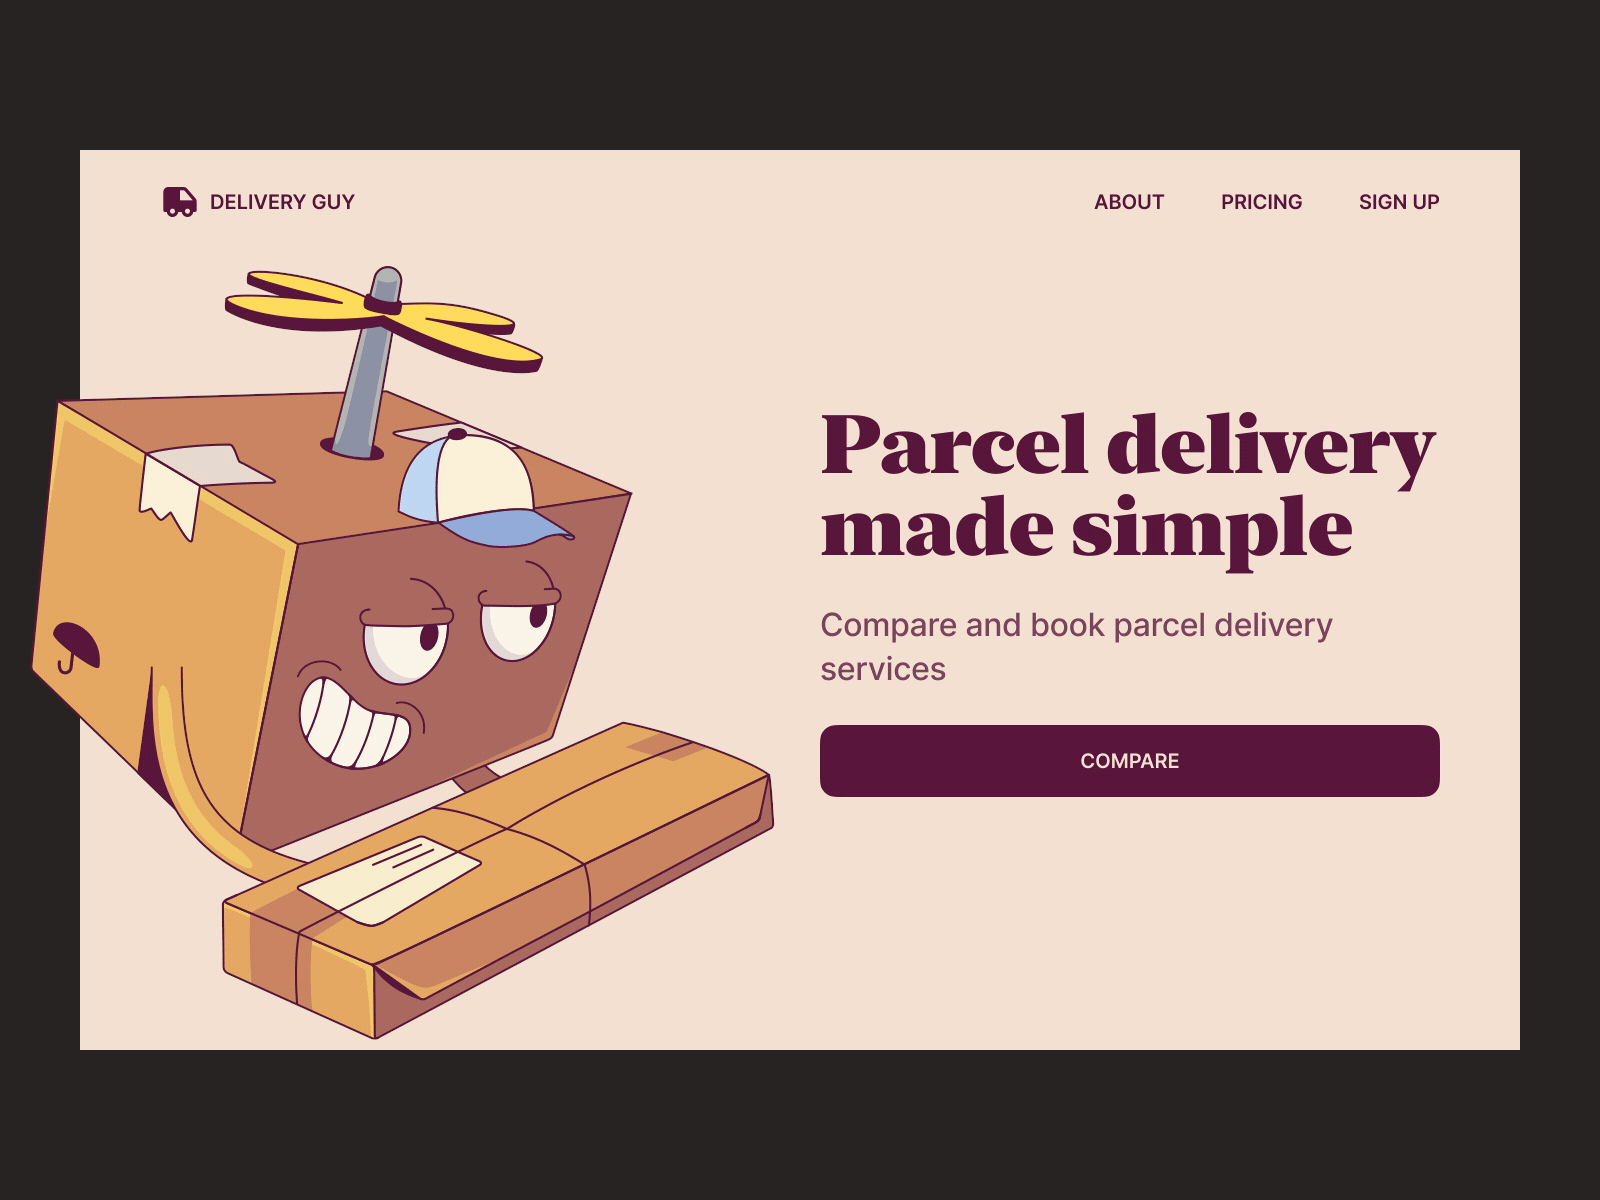 Automated delivery